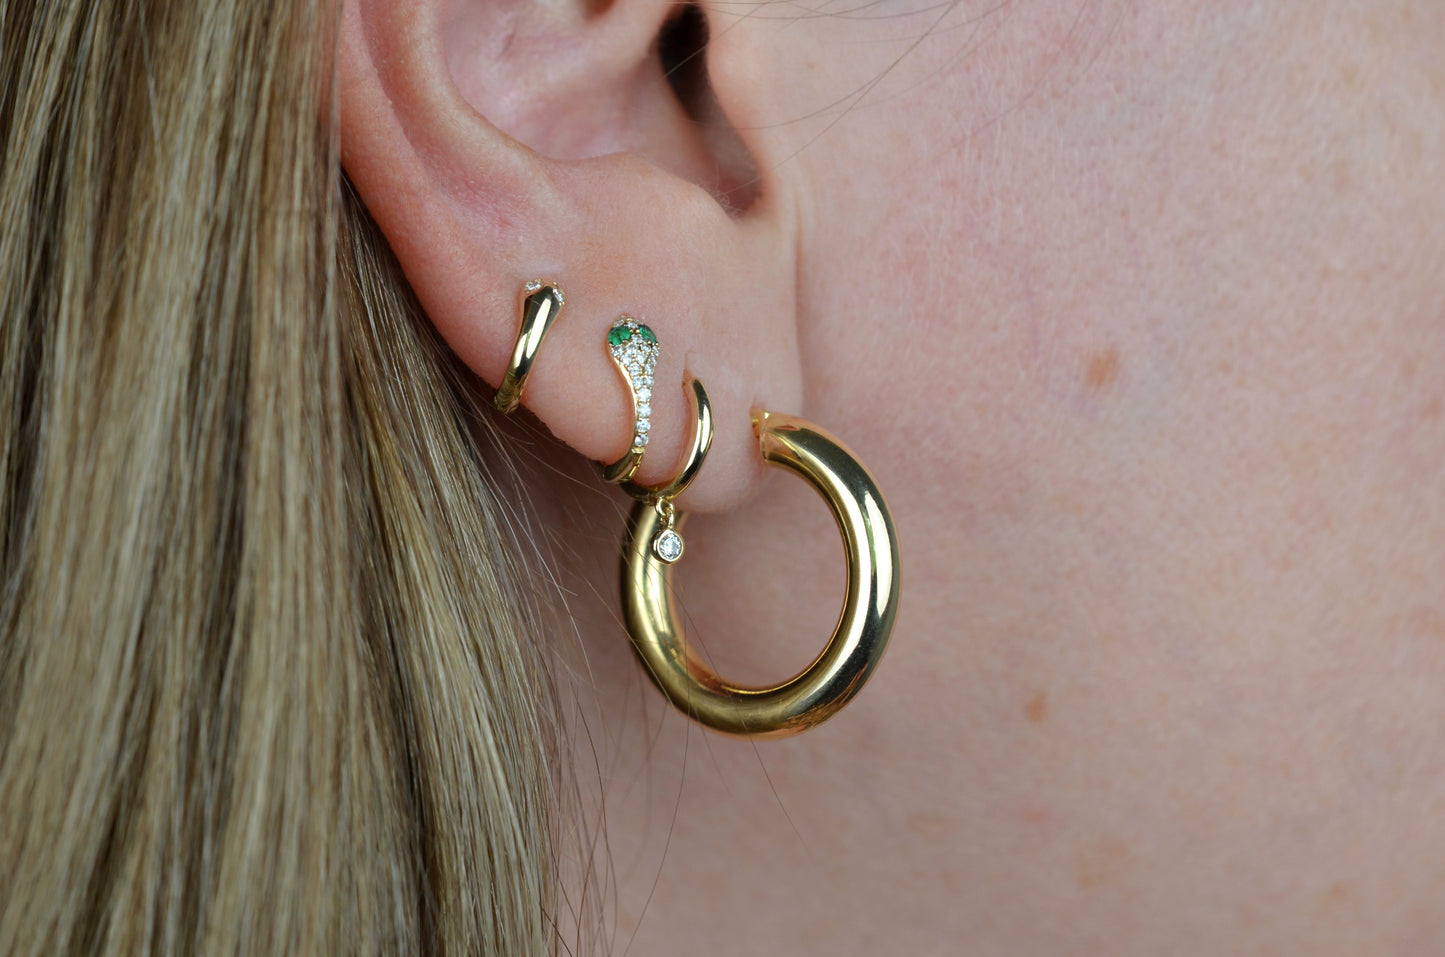 on a caucasian model, the featured hoops are shown in a first lobe piercing and fit loosely. also shown in piercings going up the lobe are a snug gold hoop with a dangling diamond, a snug gold hoop stylized as a snake with pavé diamonds and emerald eyes, and a snug gold hoop stylized as a snake with diamond eyes.